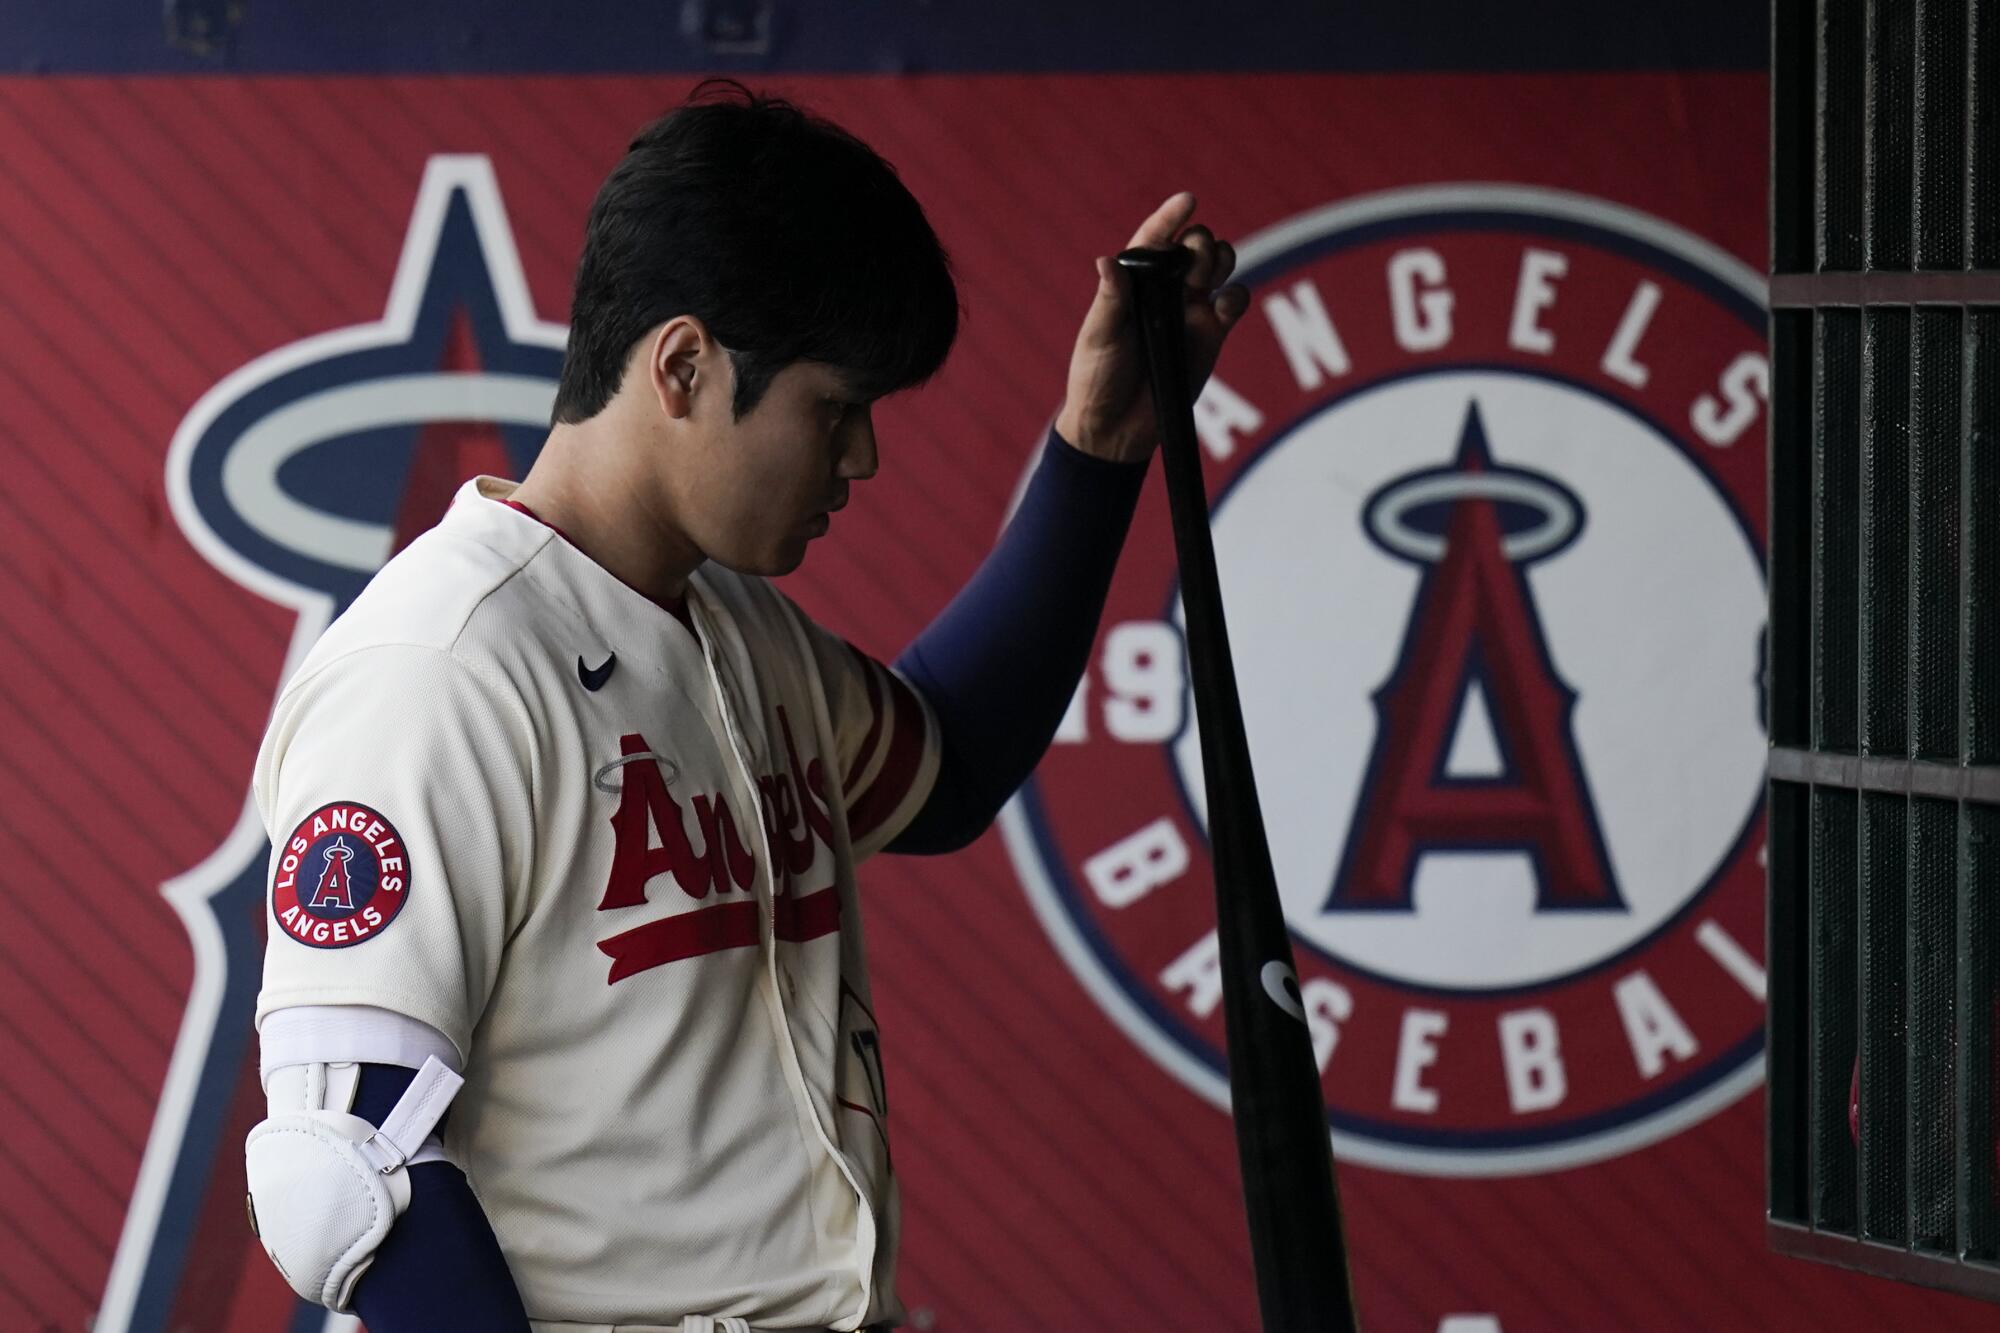 Los Angeles Angels Star Shohei Ohtani Gives Mariners Fans a Little Hope  That He May Sign in Seattle This Offseason - Fastball